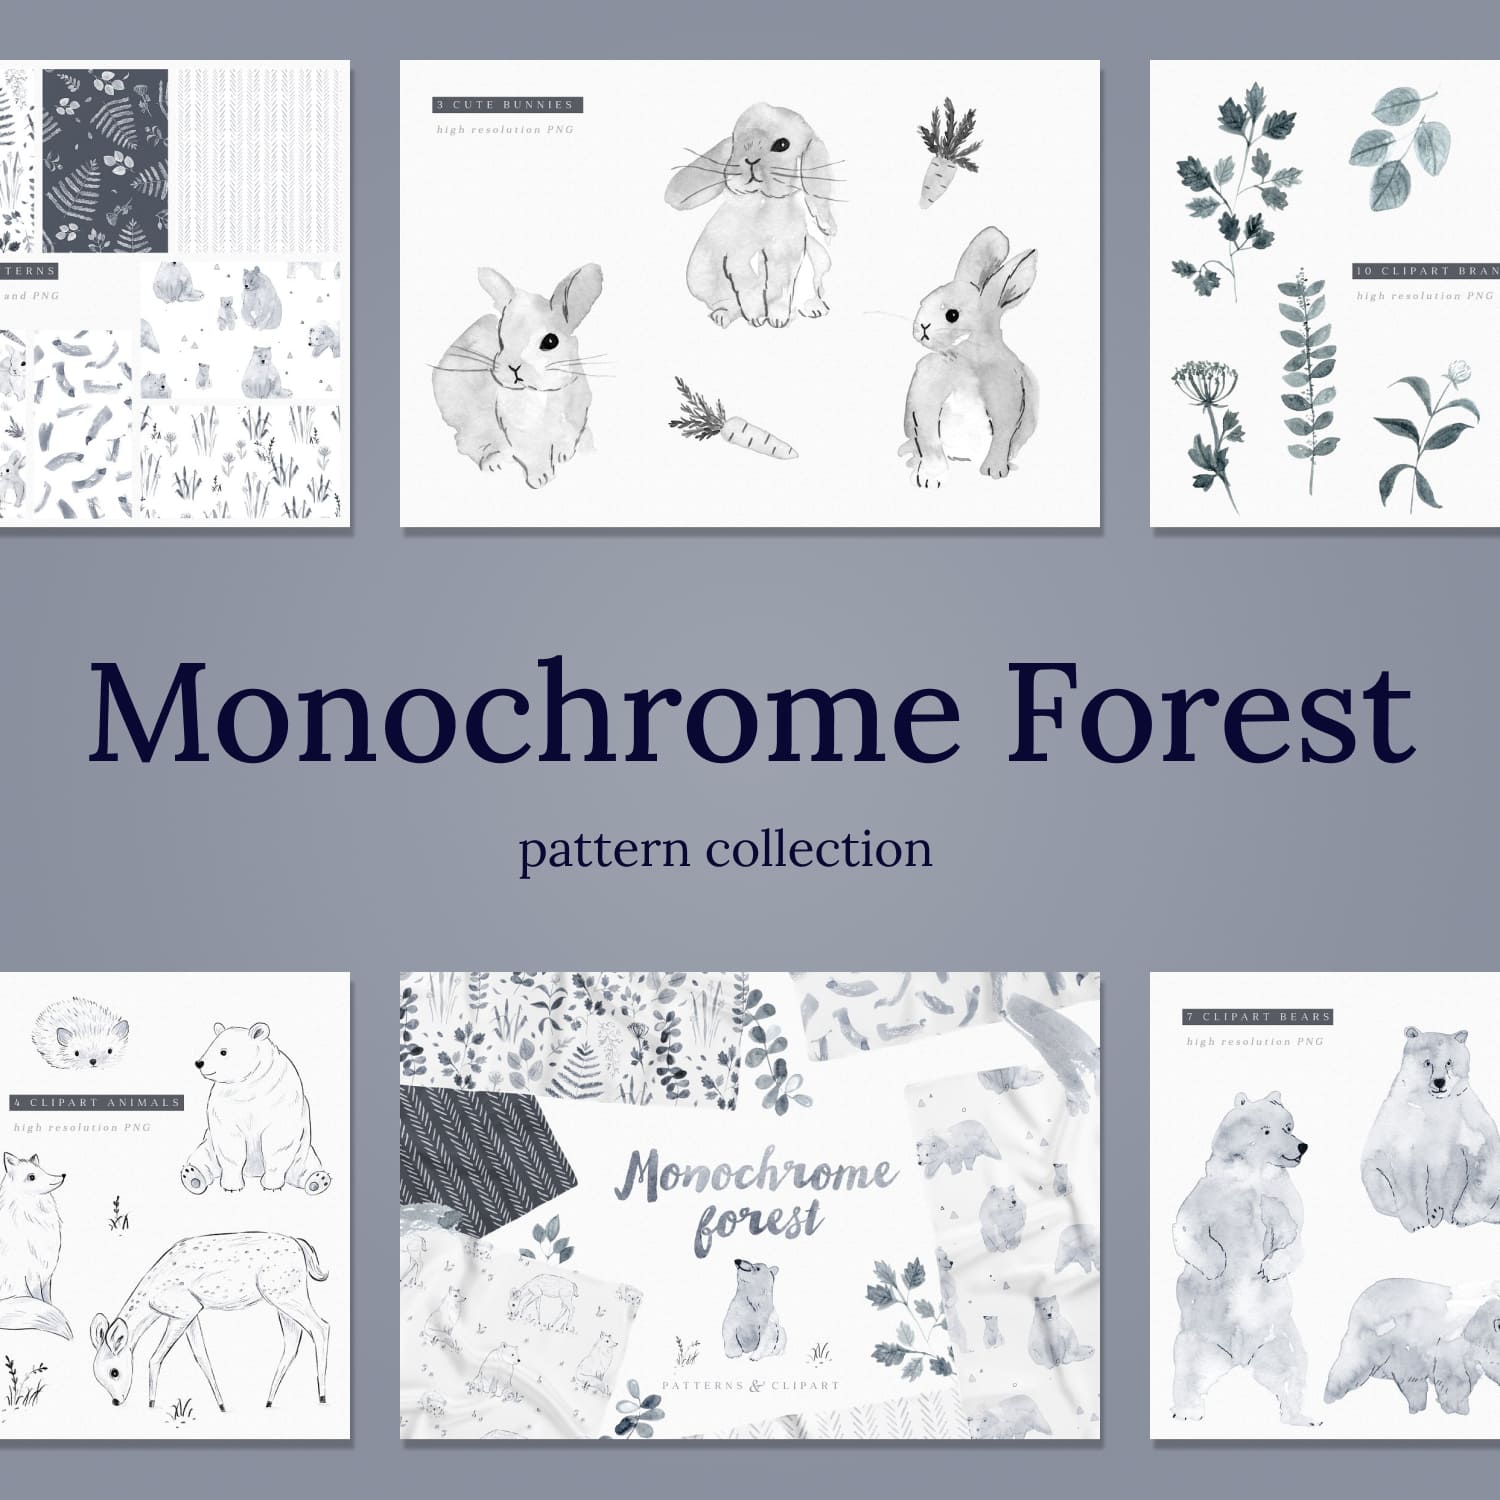 Monochrome Forest pattern collection.